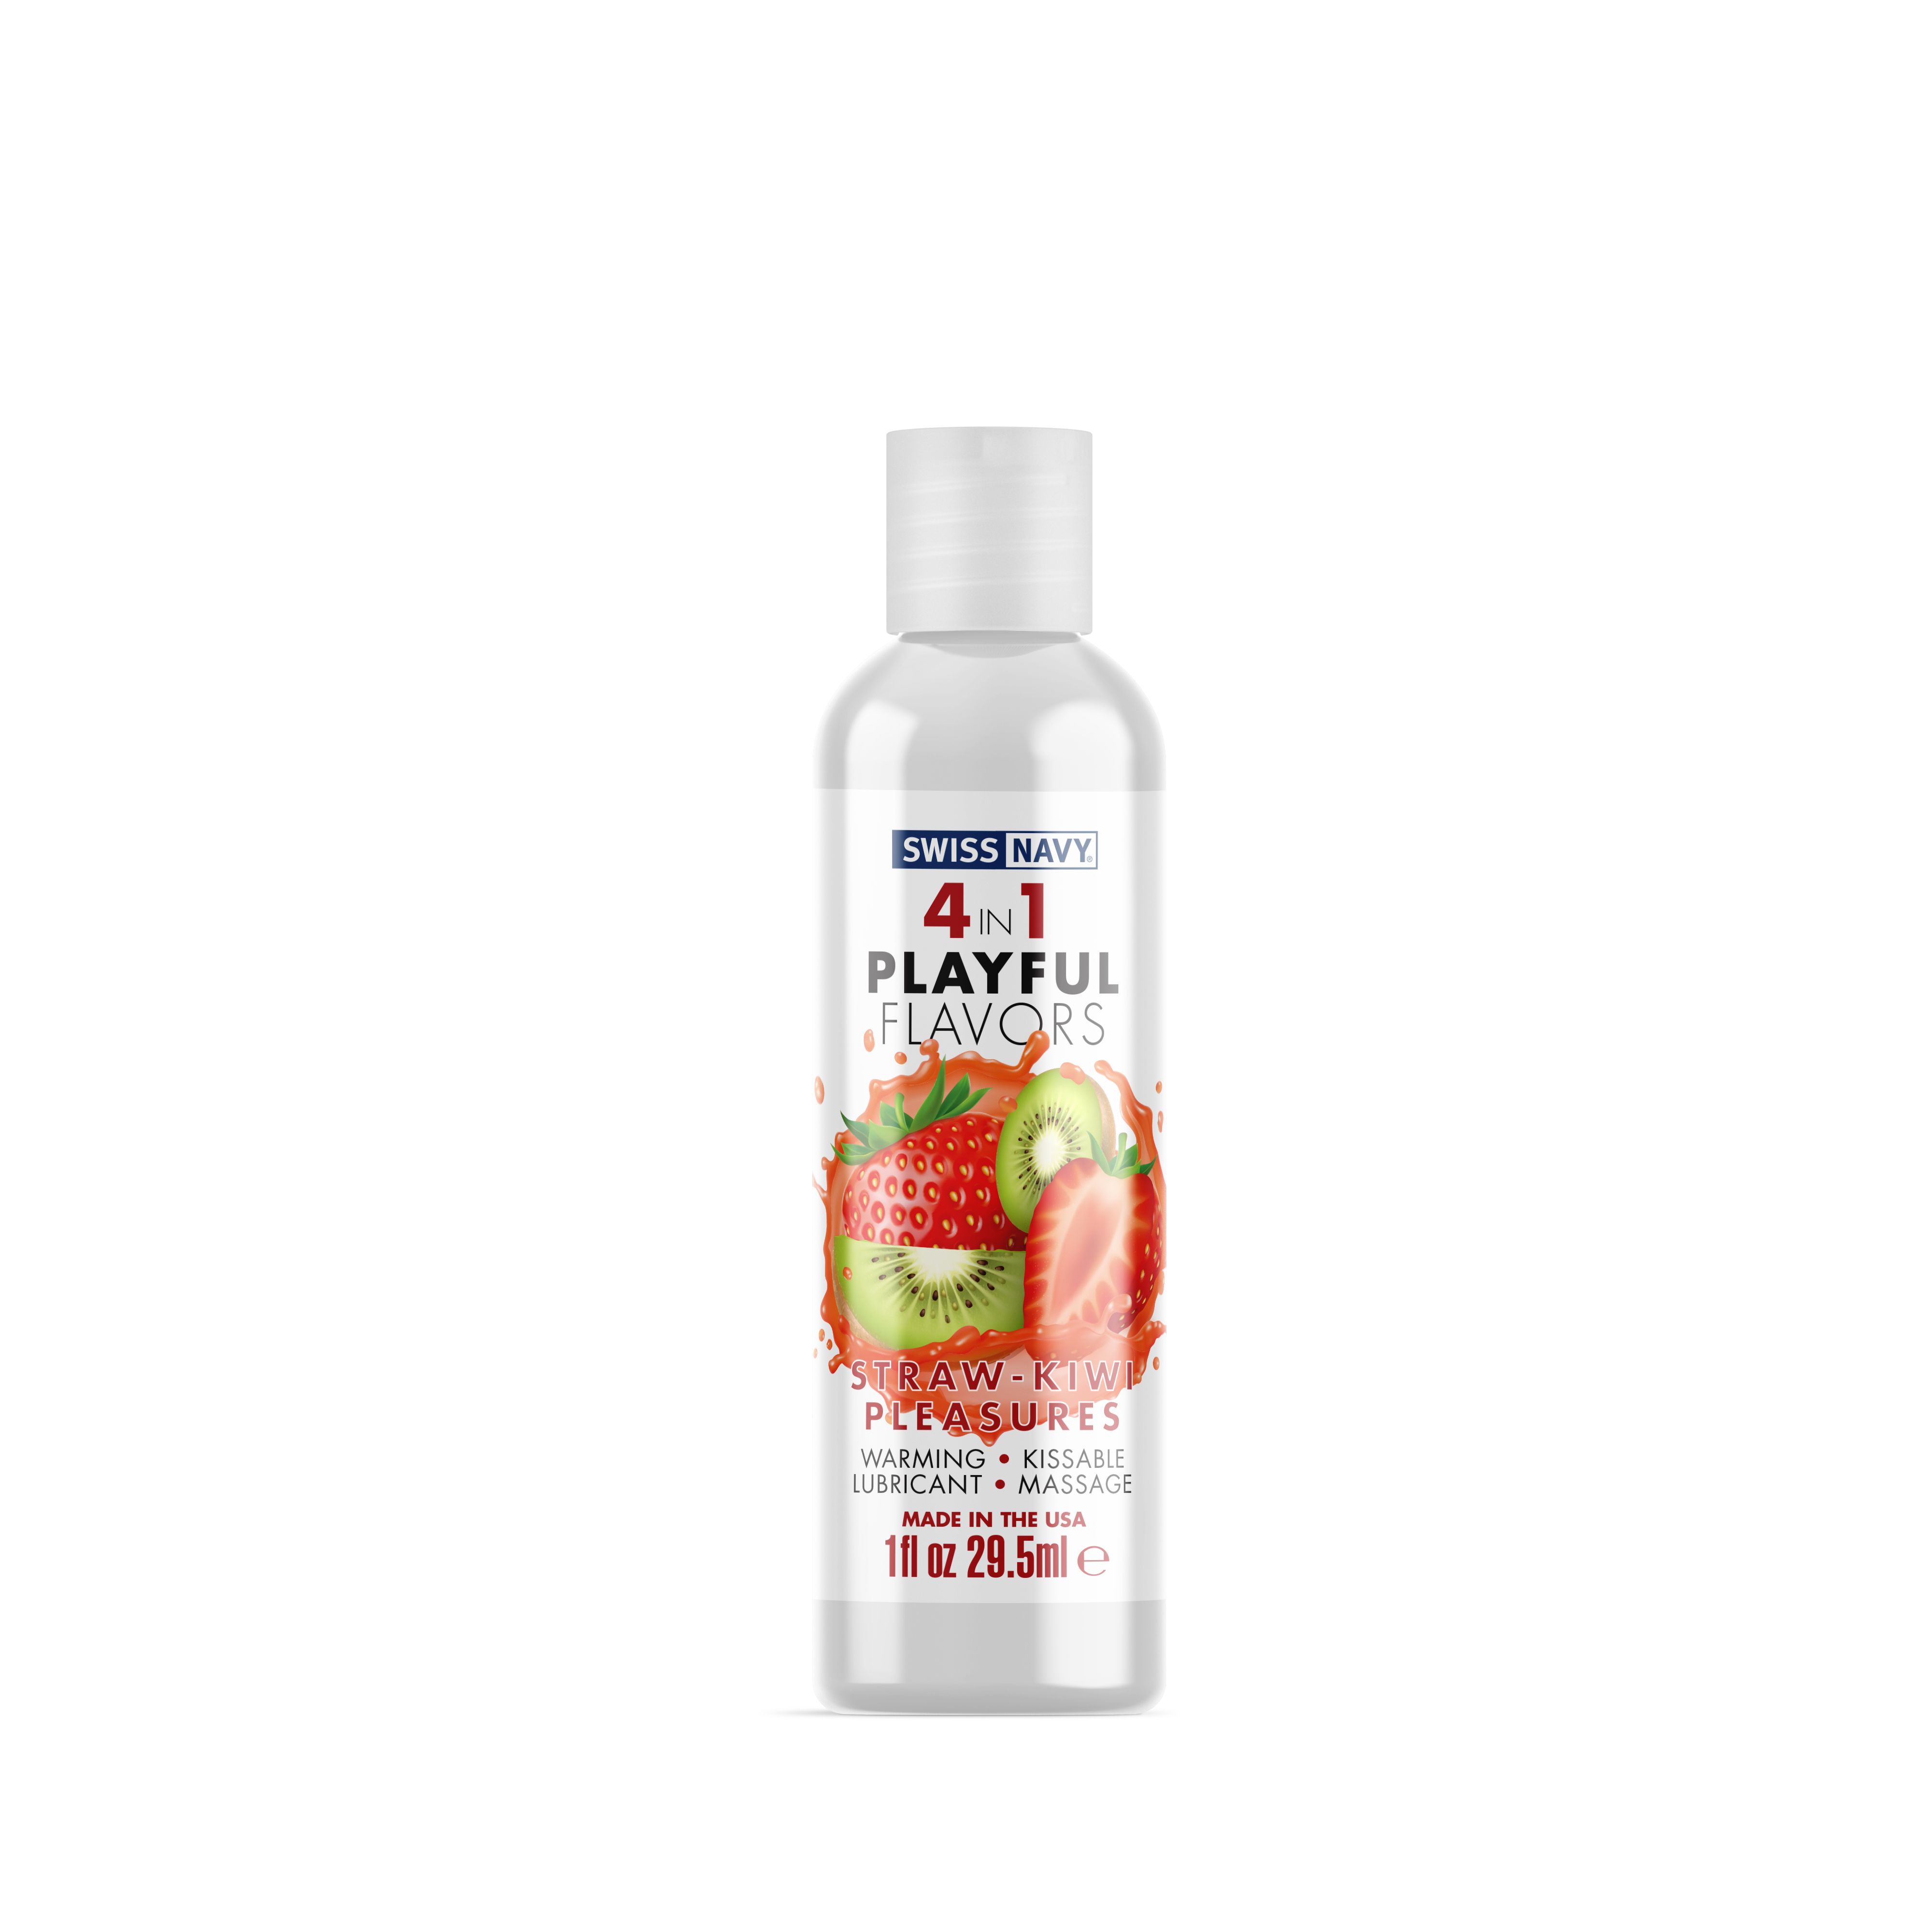 SWISS NAVY 4 IN 1 PLAYFUL FLAVORS STRAWBERRY KIWI PLEASURE 1OZ - Click Image to Close